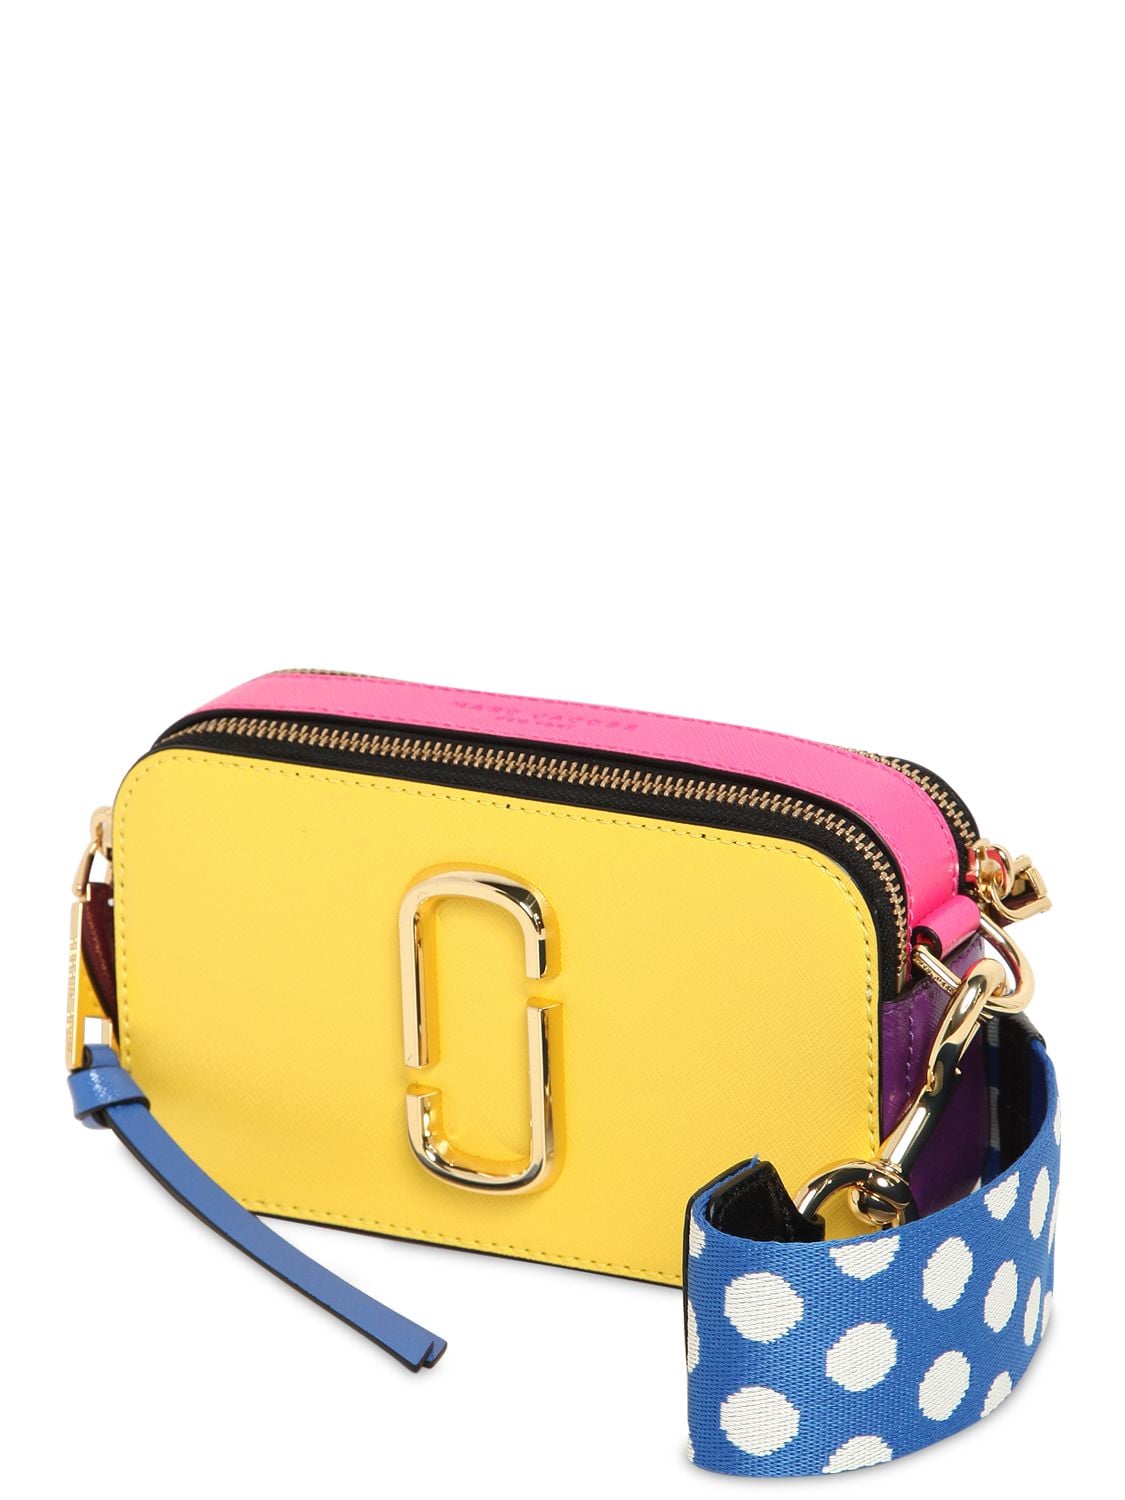 Marc Jacobs Snapshot Leather Shoulder Bag In Yellow/multi